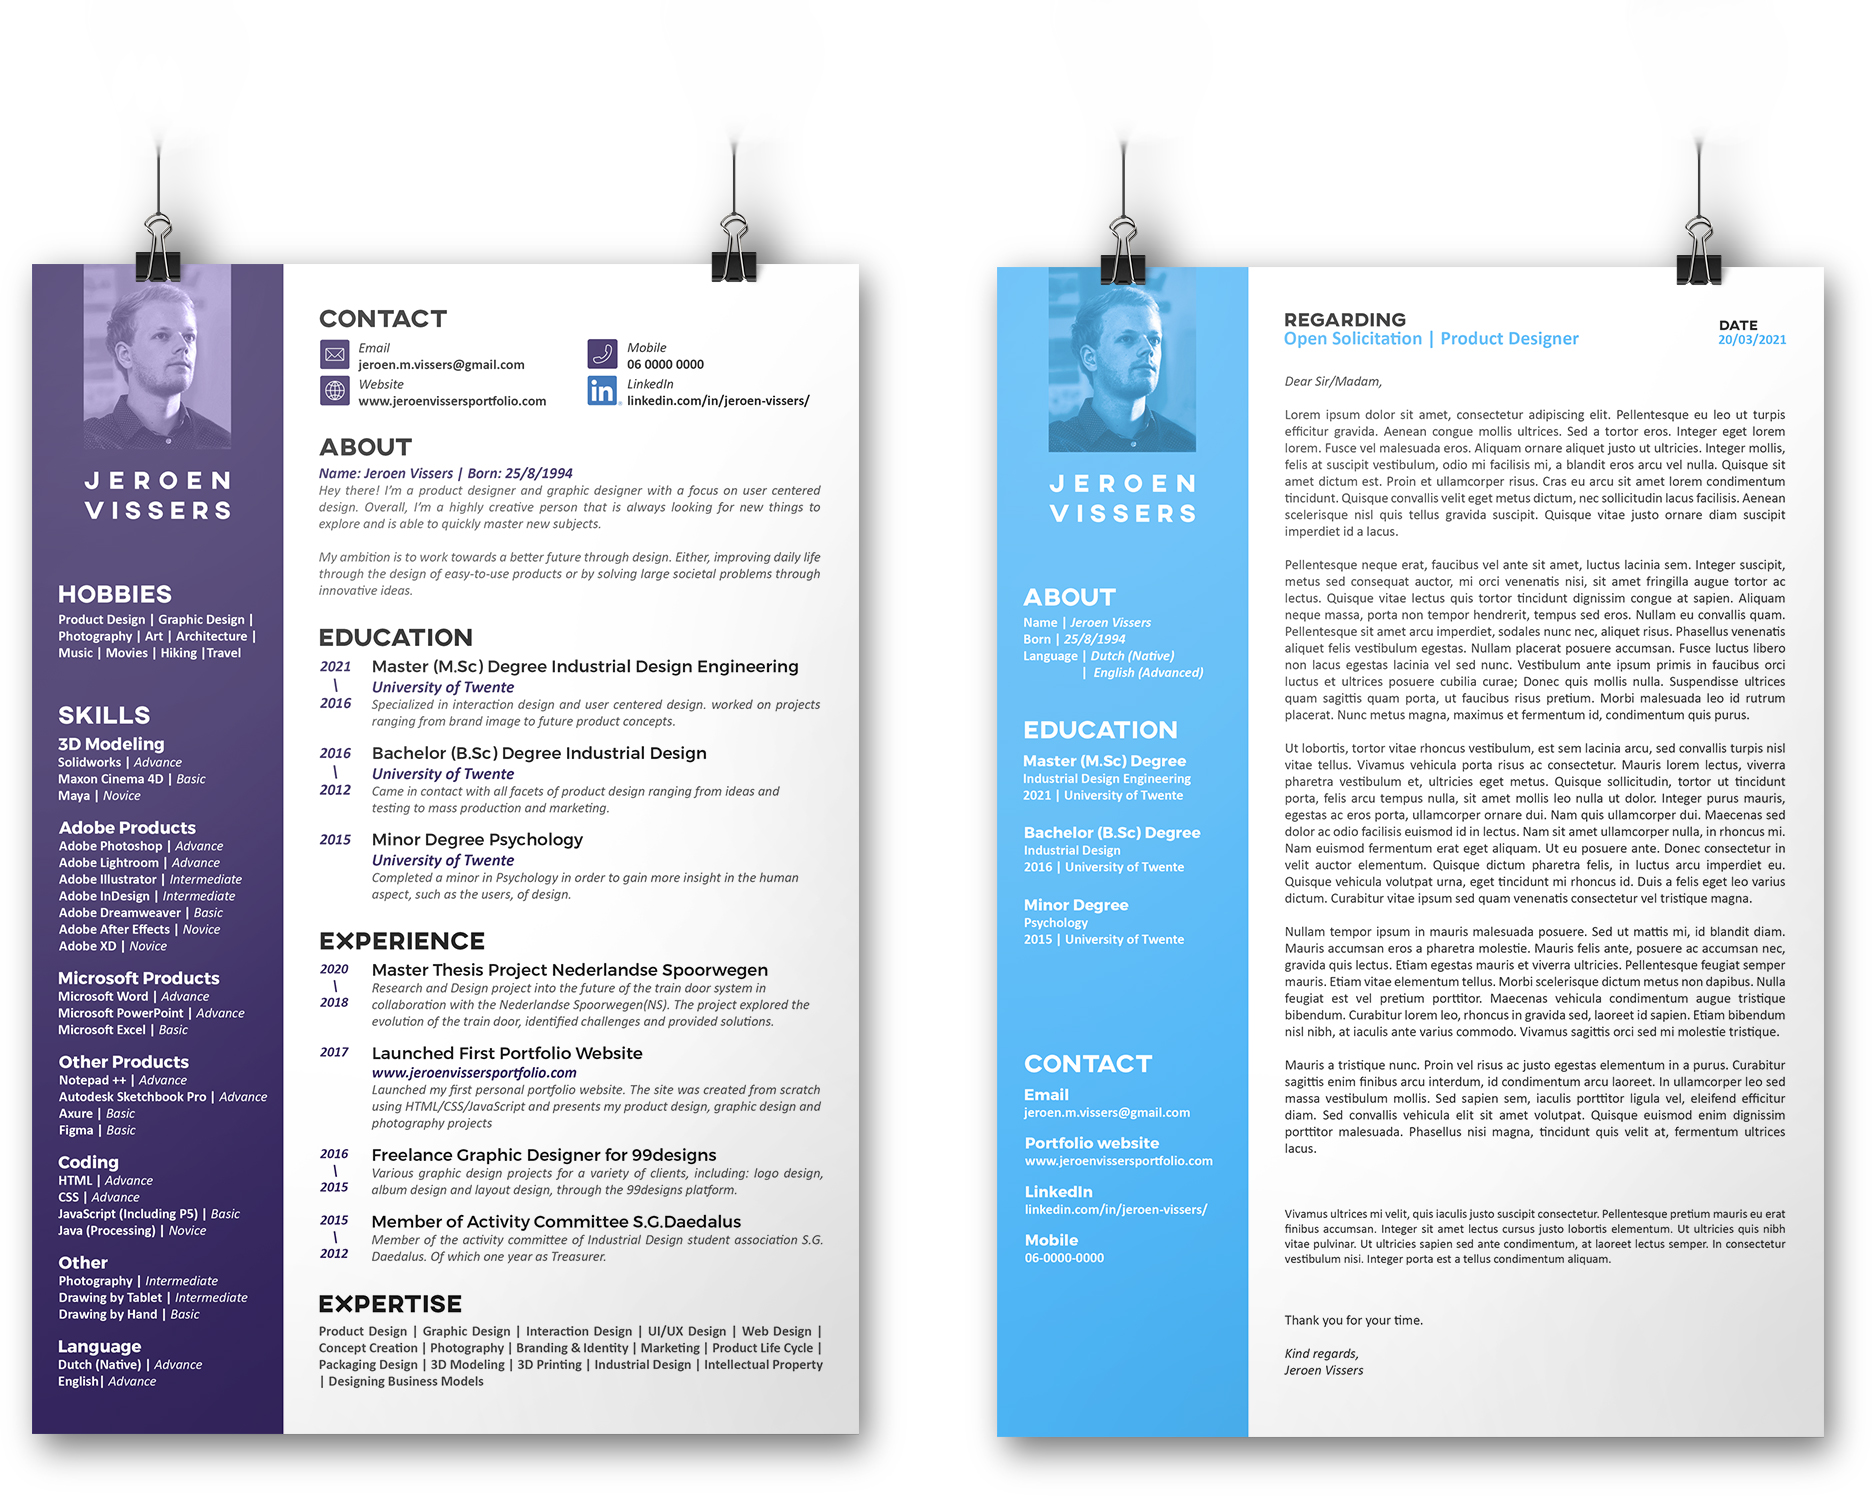 Mockup CV and Cover Letter